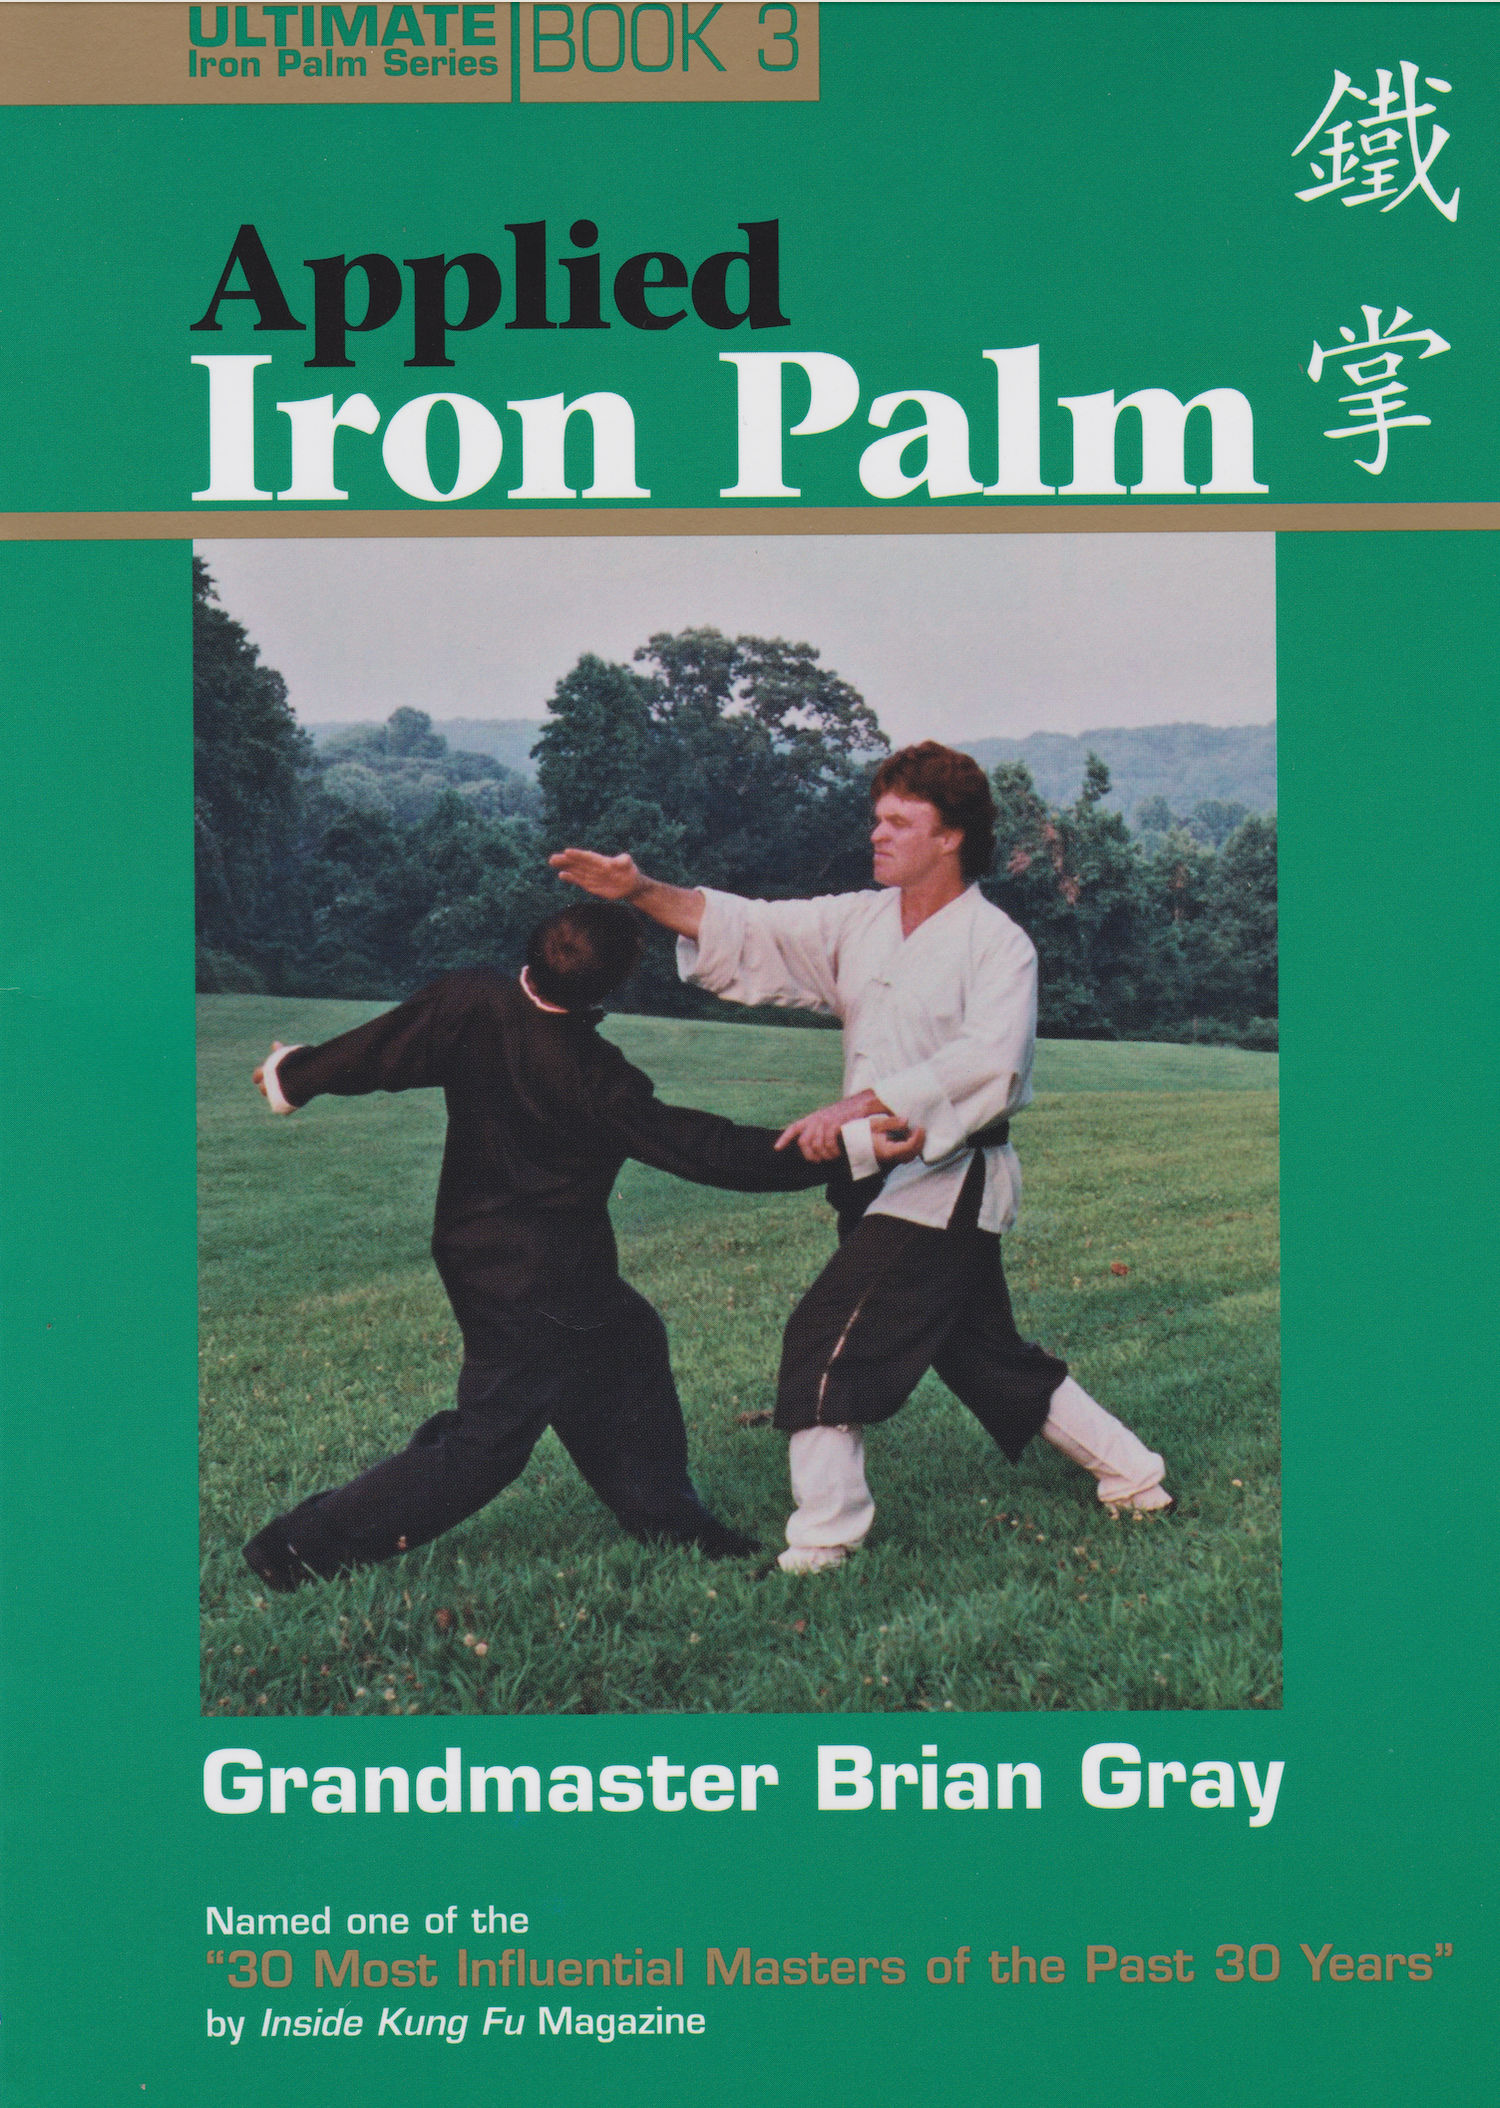 Ultimate Iron Palm Series Book 3: Applied Iron Palm by Brian Gray (Preowned)